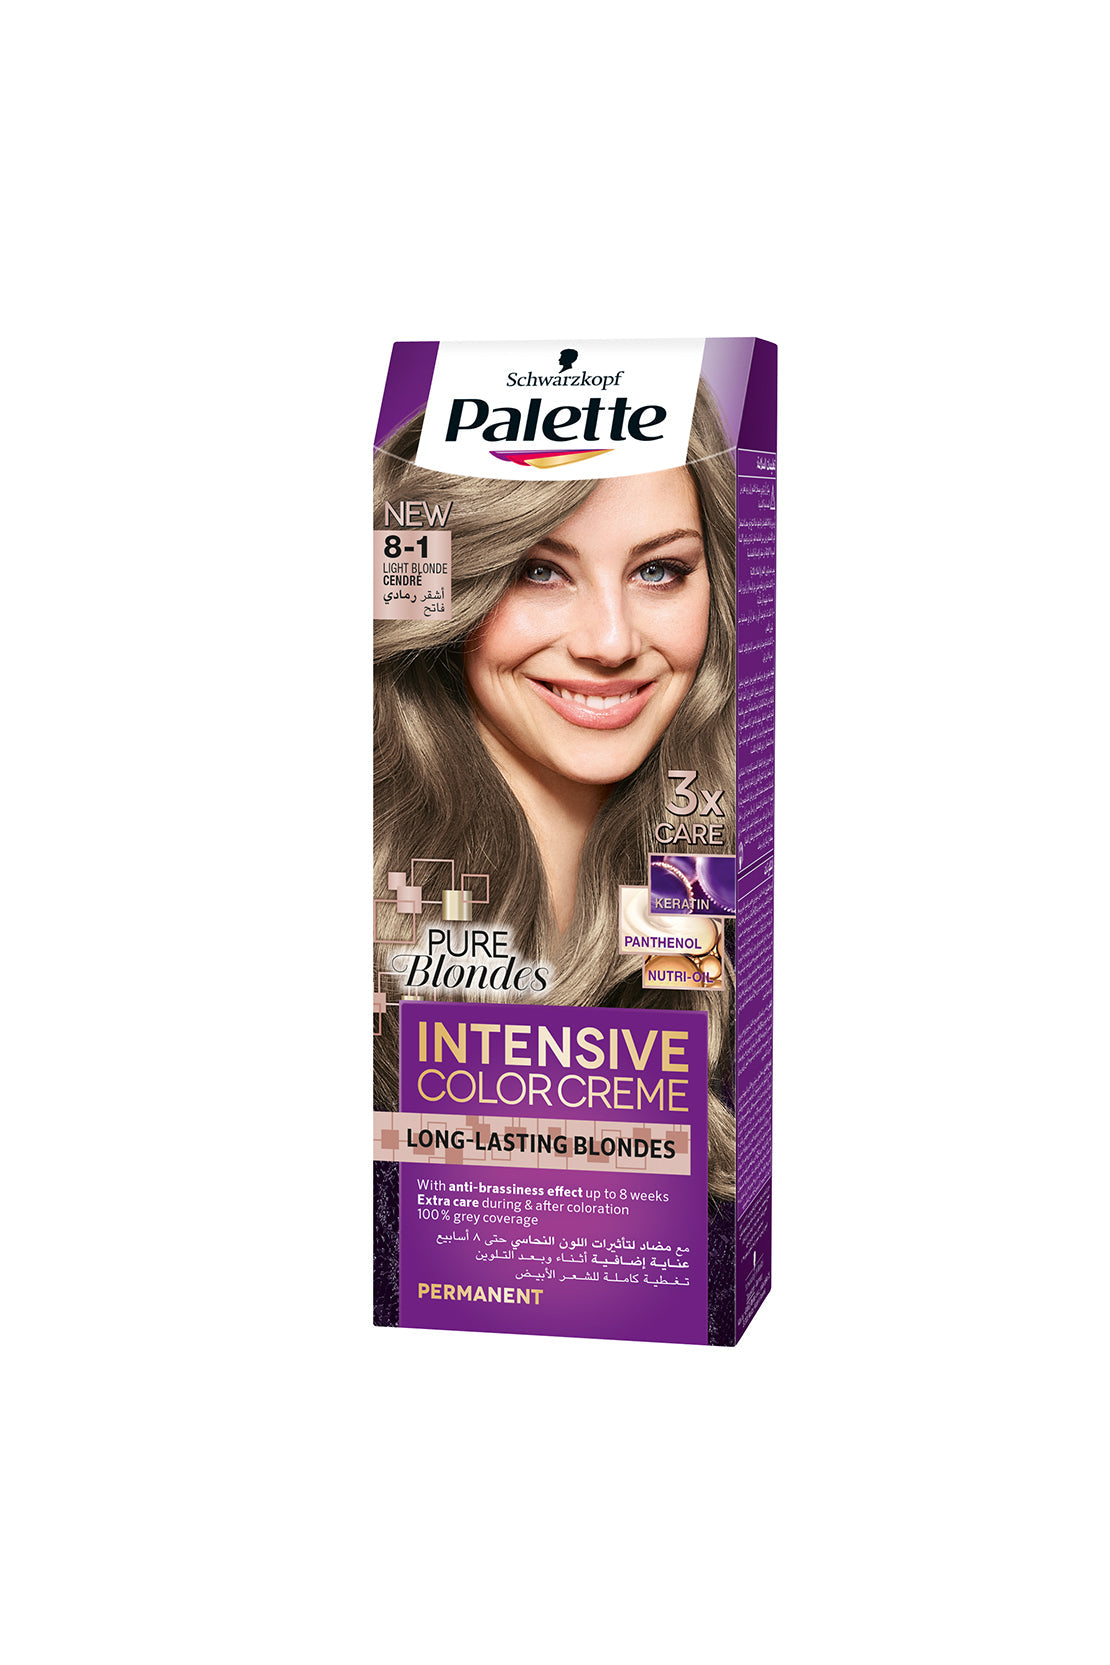 Intensive Color Creme with Long Lasting Intensity ( 8-1 Light Blonde Cendre ) RIOS